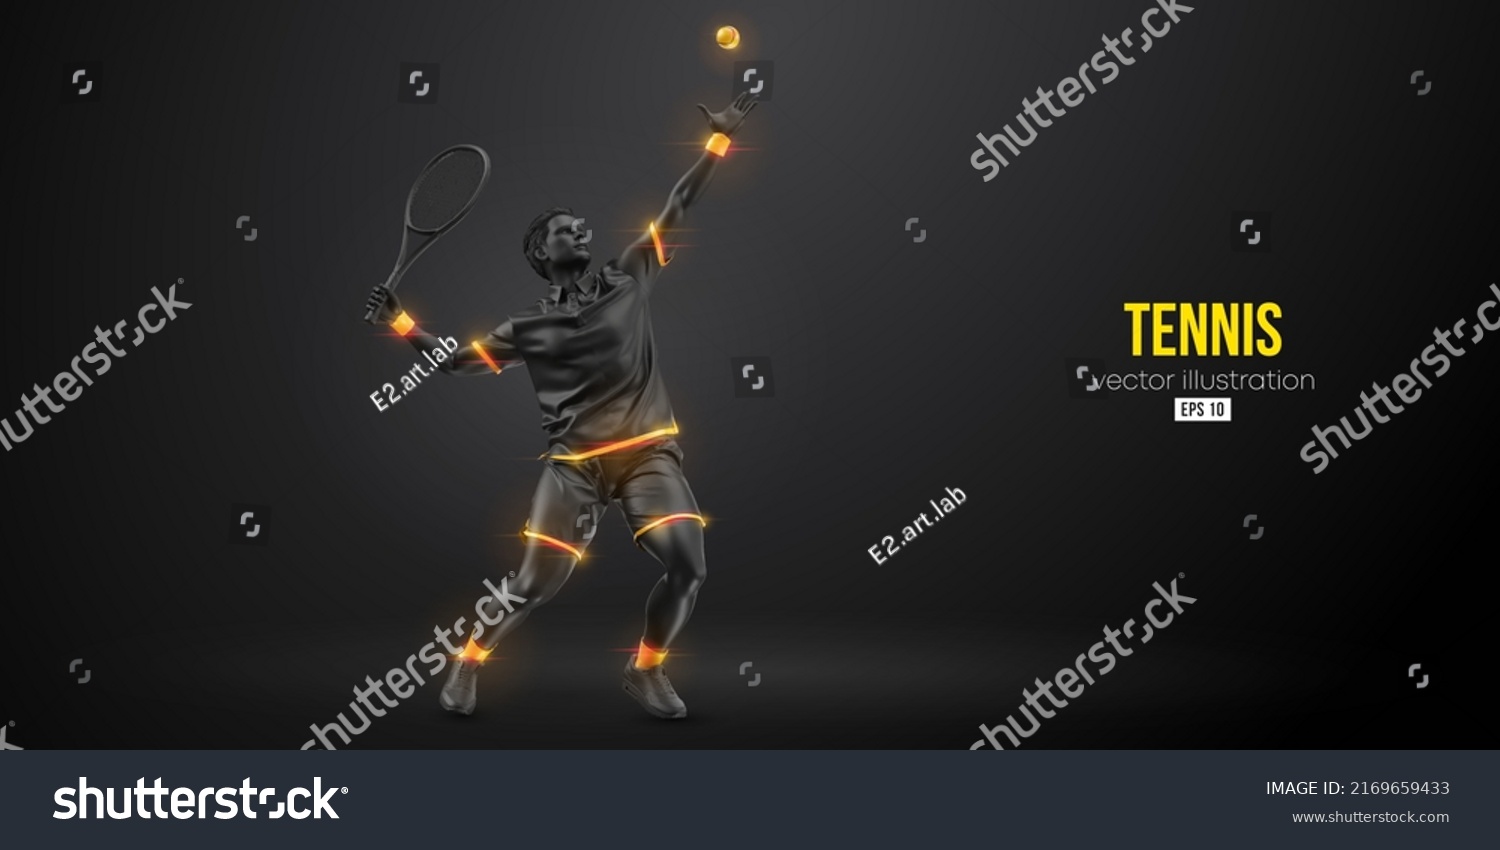 Abstract silhouette of a tennis player on black background. Tennis player man with racket hits the ball. Vector illustration #2169659433